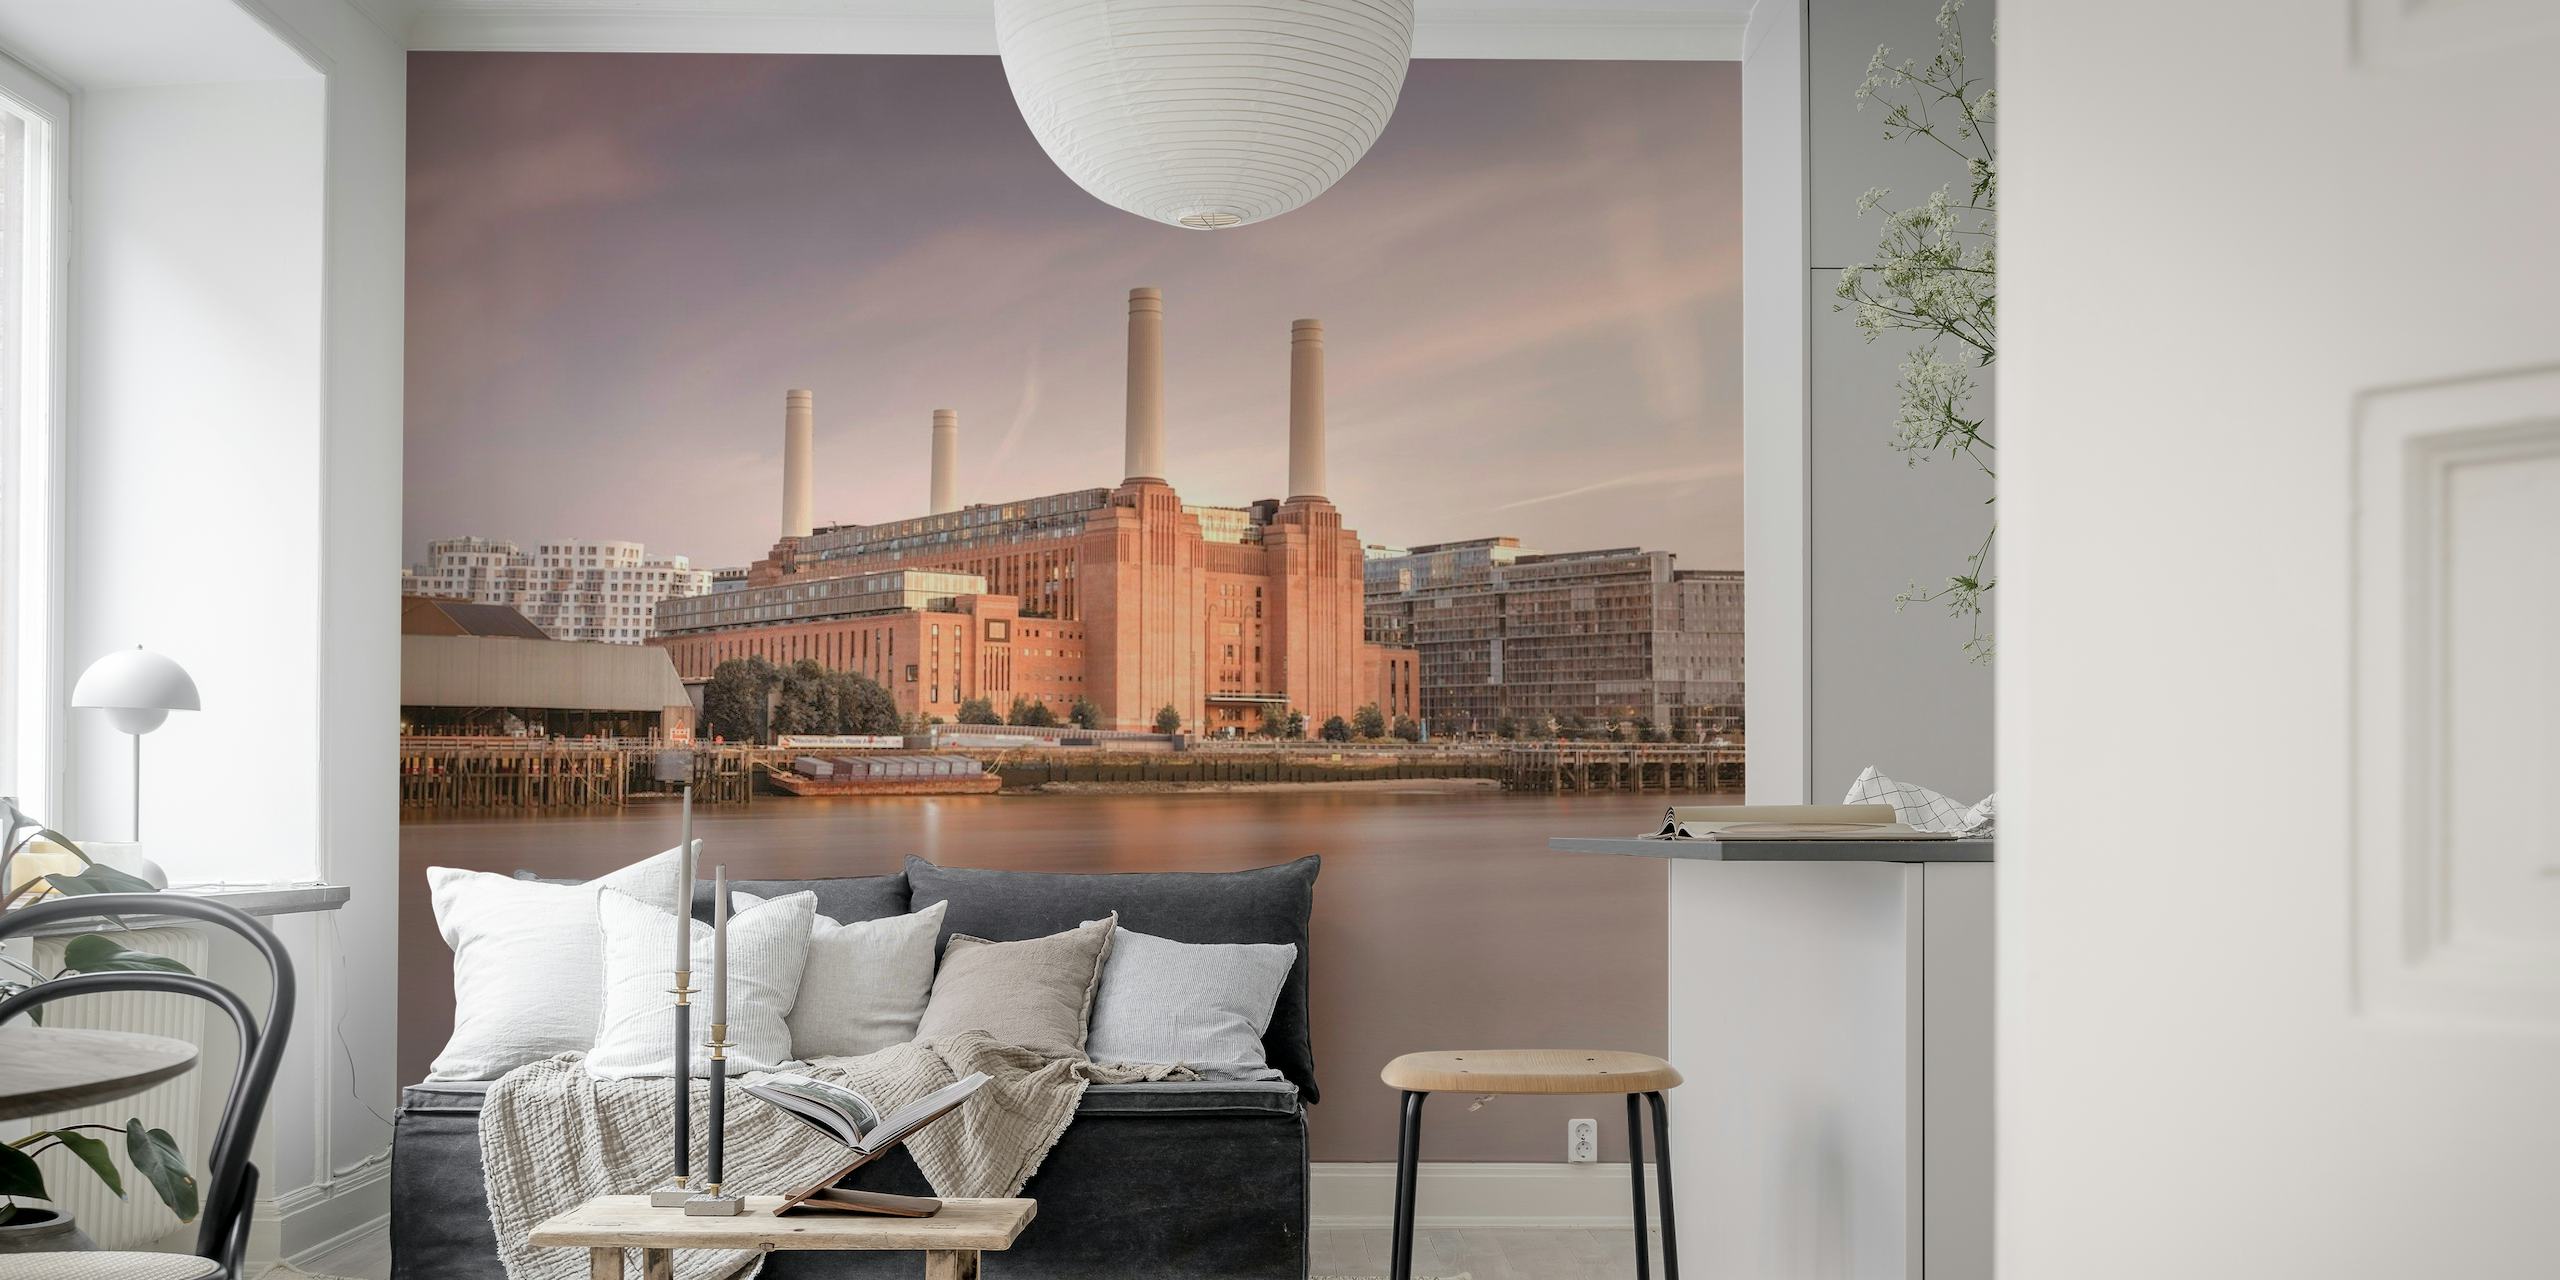 Battersea Power Station wall mural with pastel sky reflected on the Thames